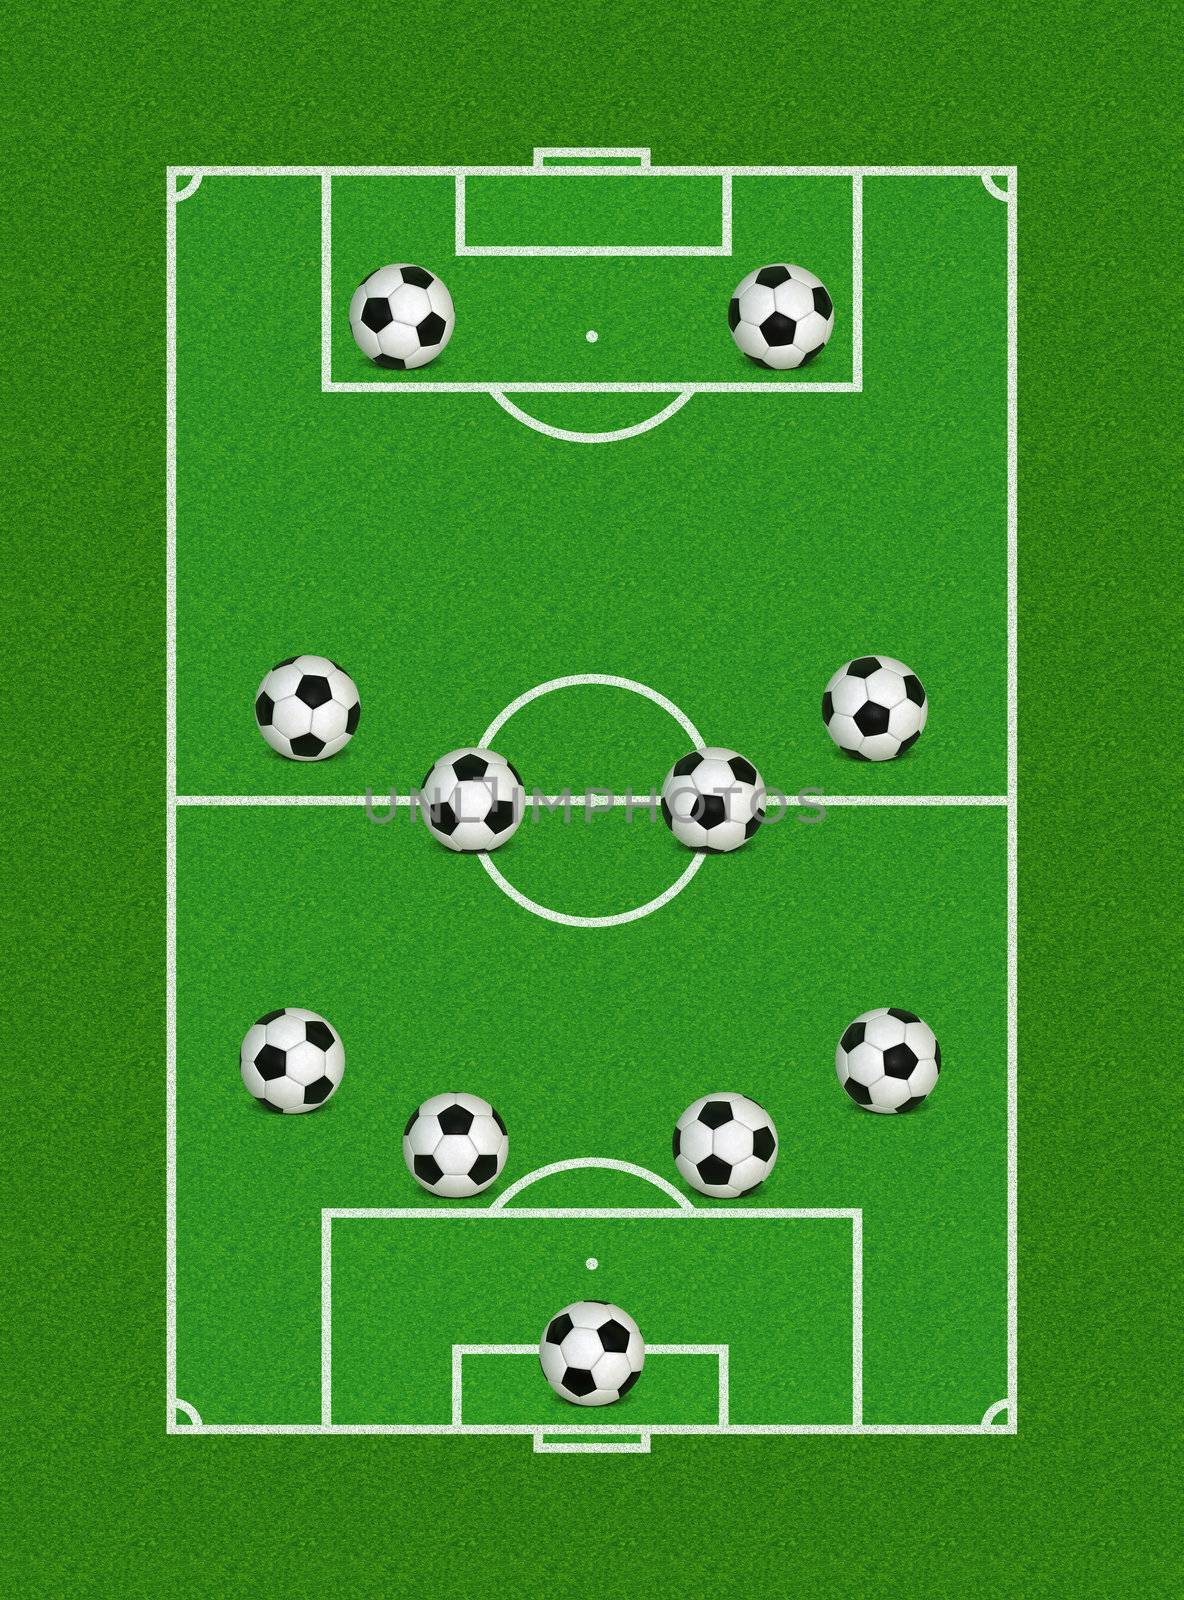 Illustration of 4-4-2 Soccer Formation on Field - Aerial View